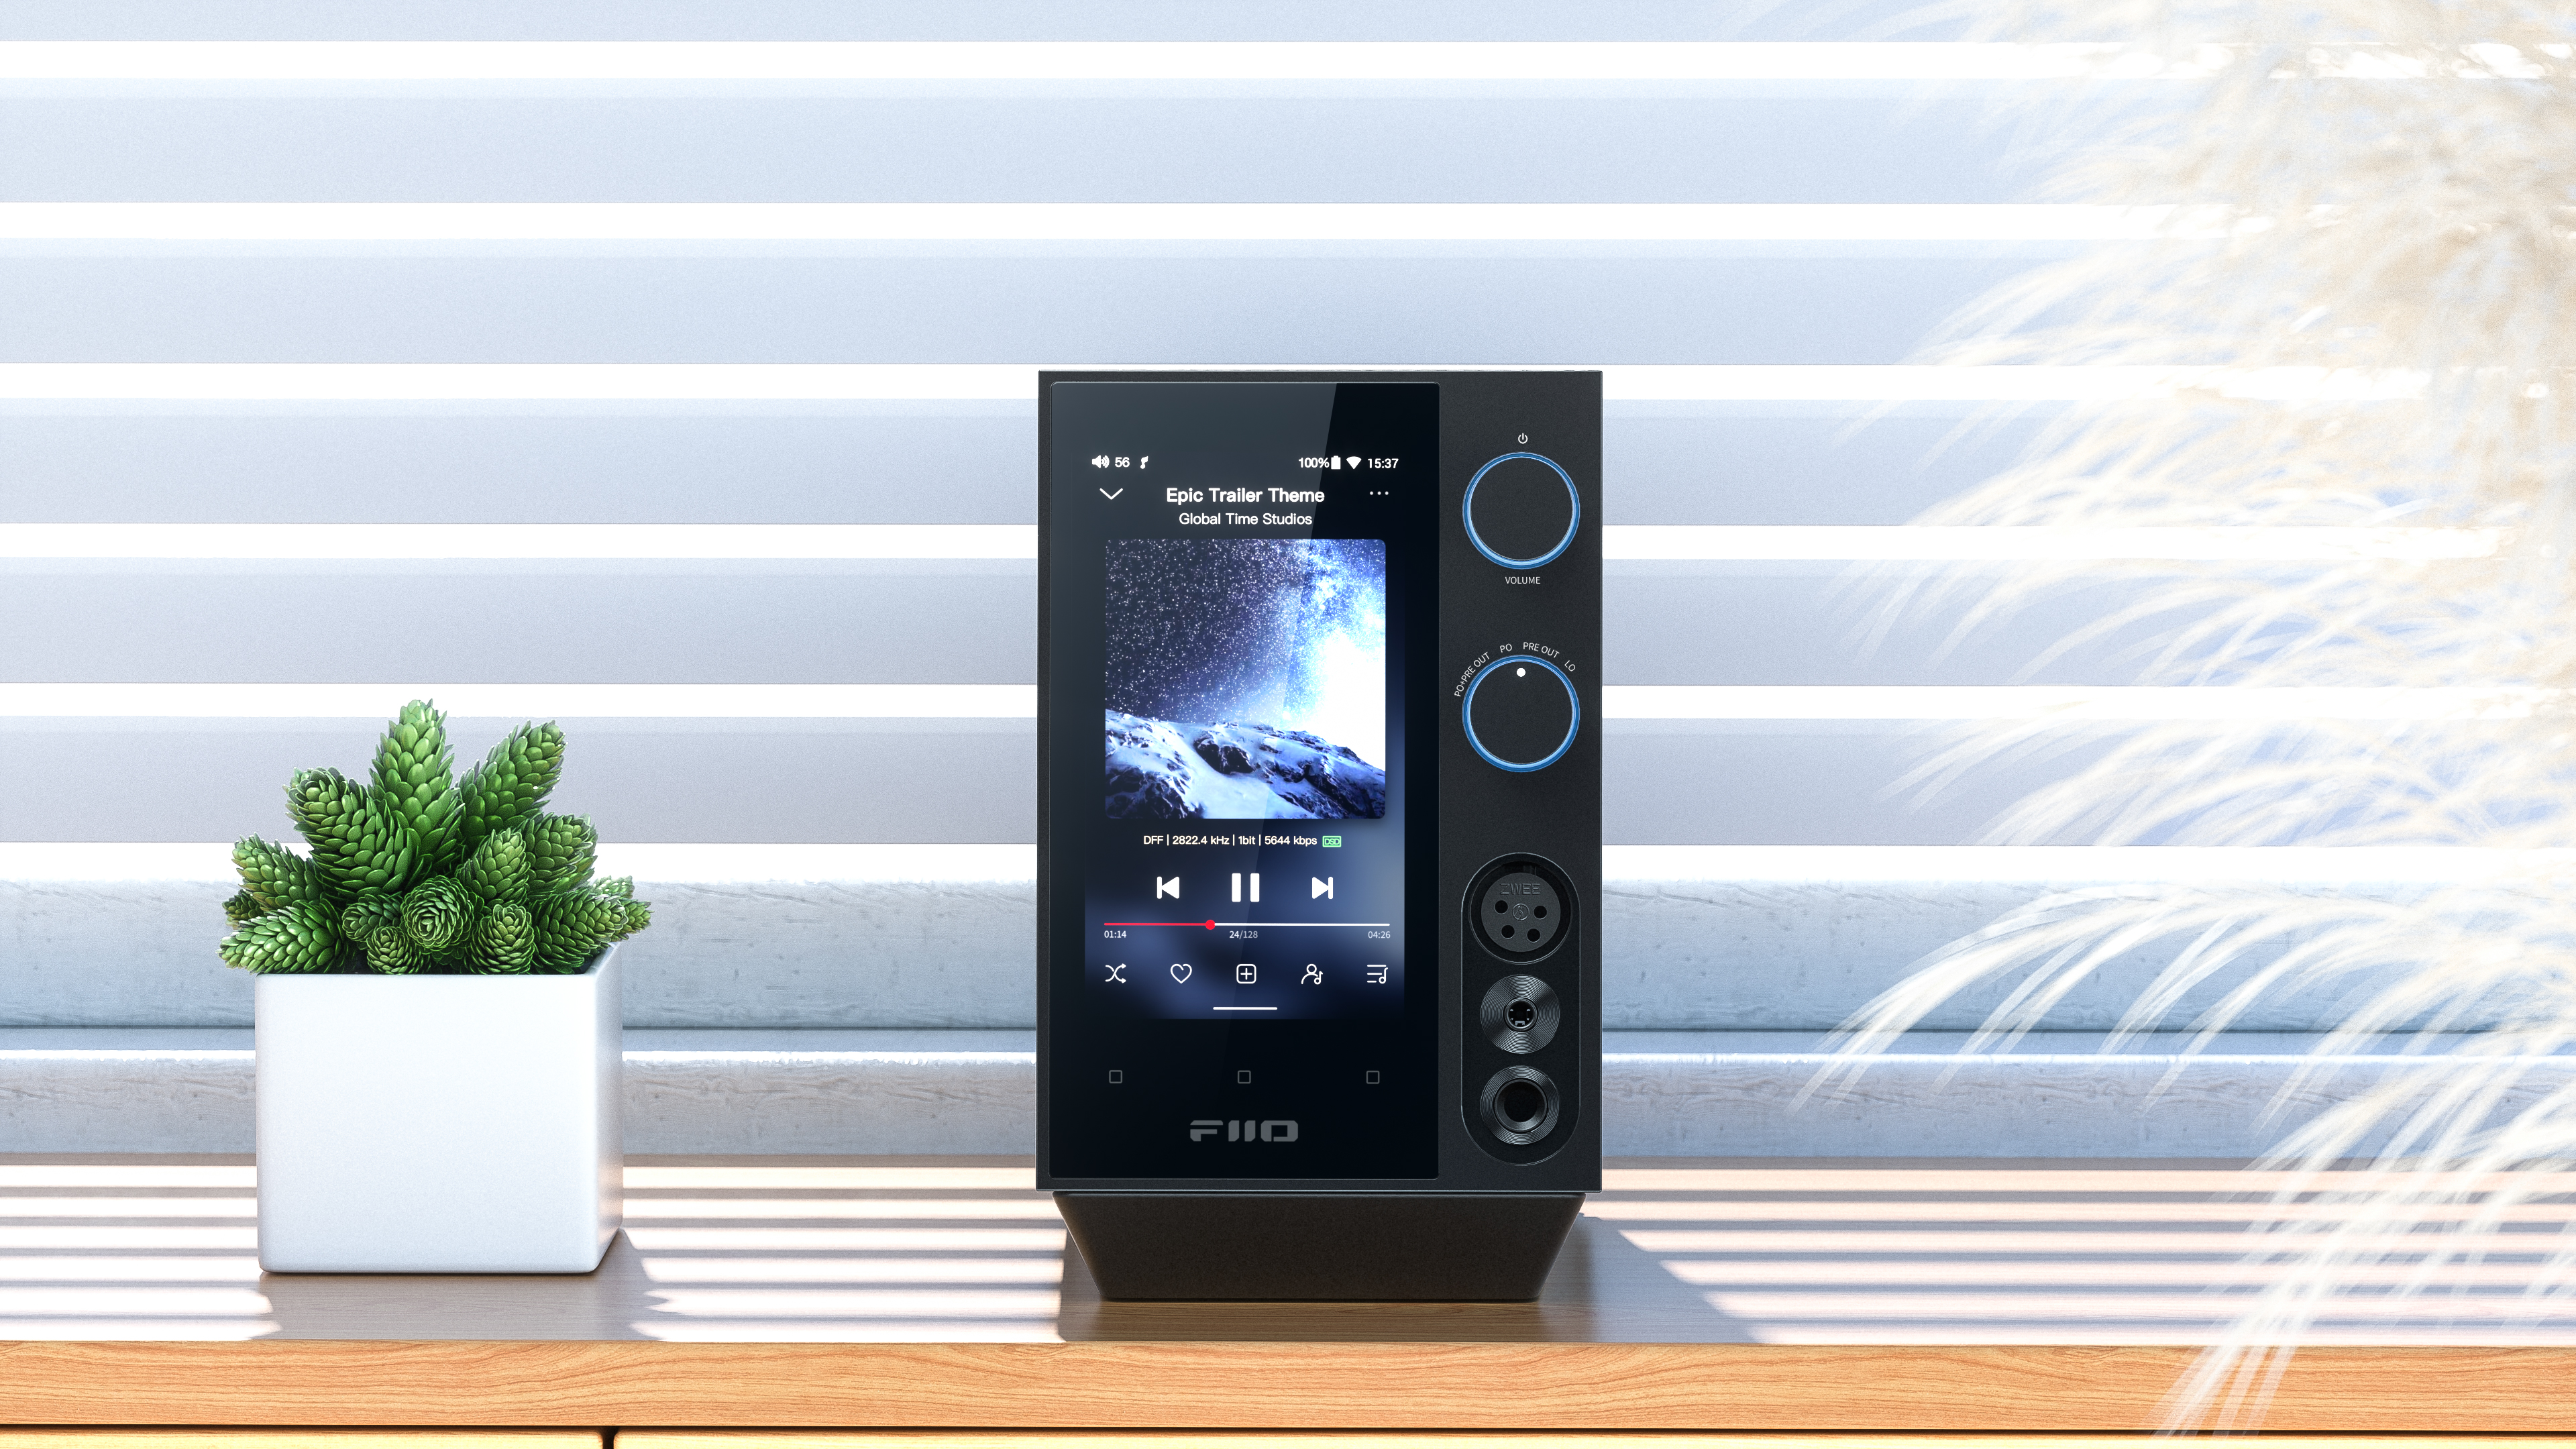 Spotify launches its first hardware device, a touchscreen player